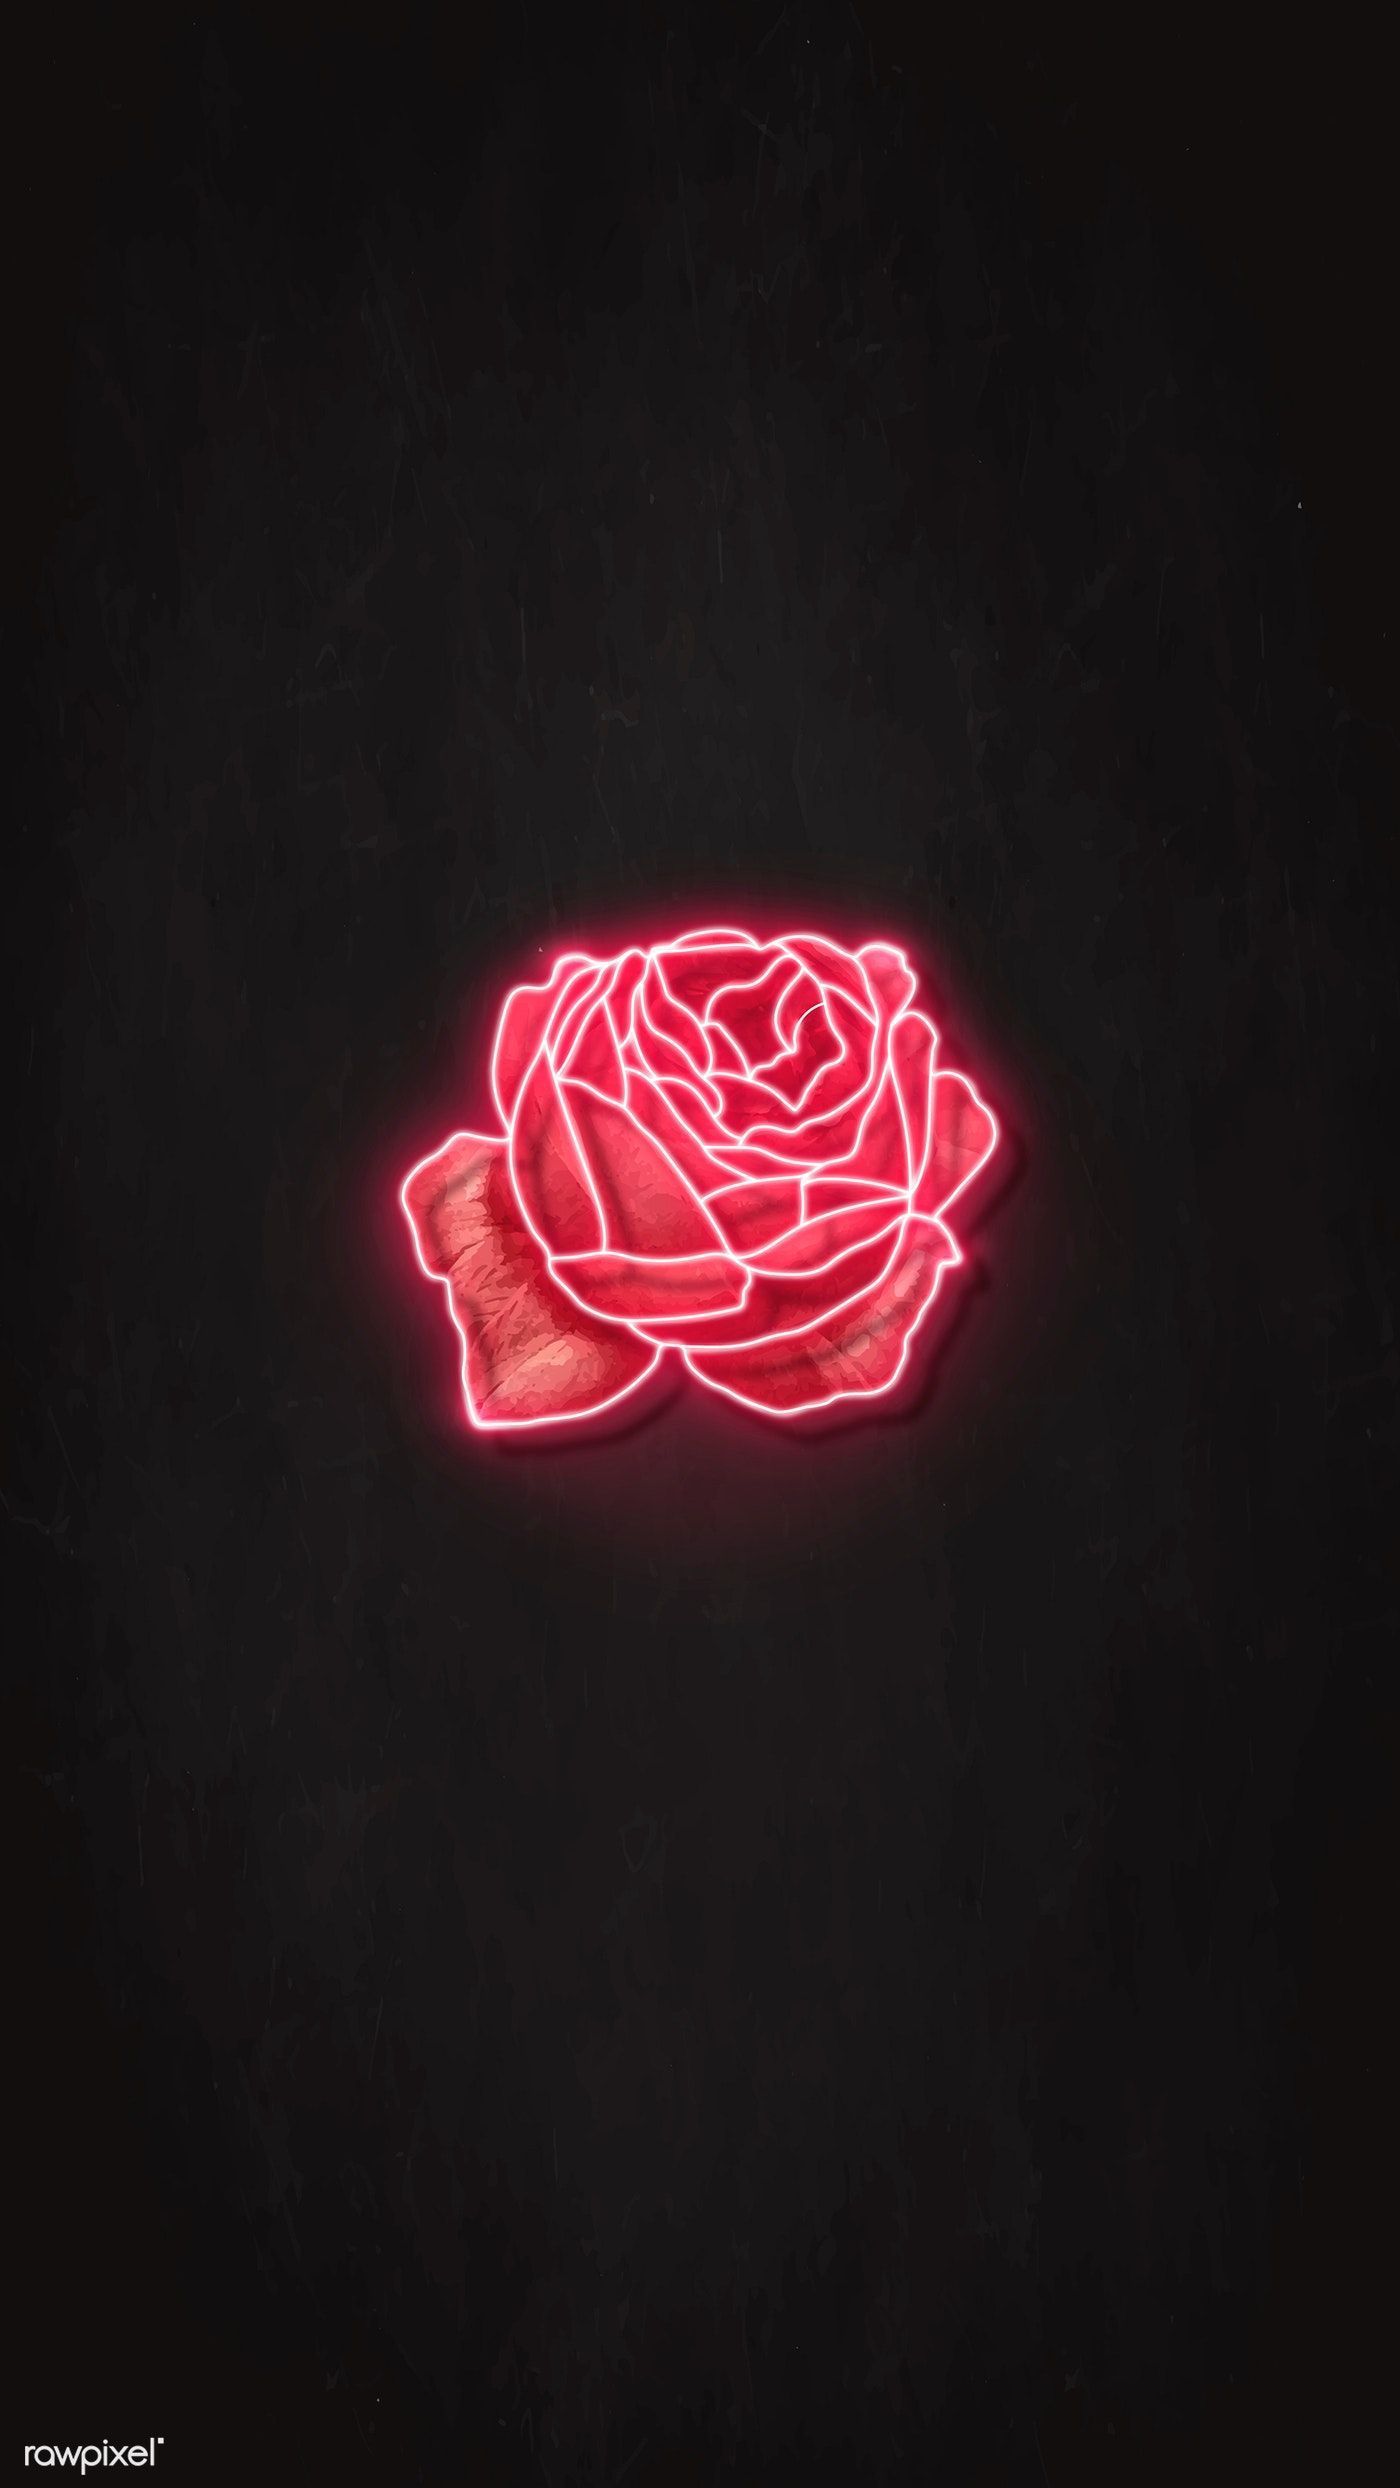 A neon rose on black background - Light red